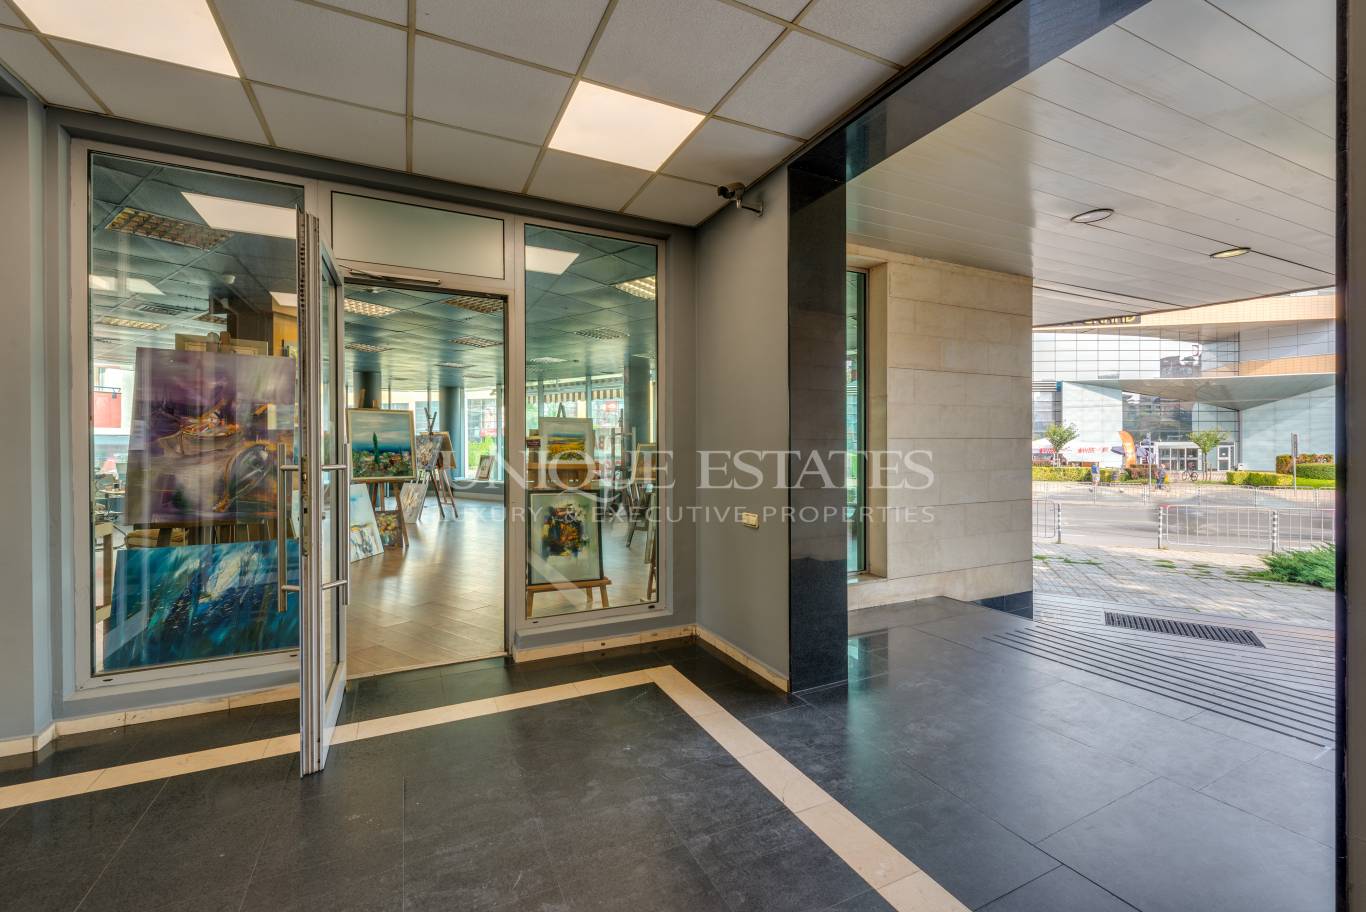 Office for rent in Sofia, Lozenets with listing ID: K13950 - image 1